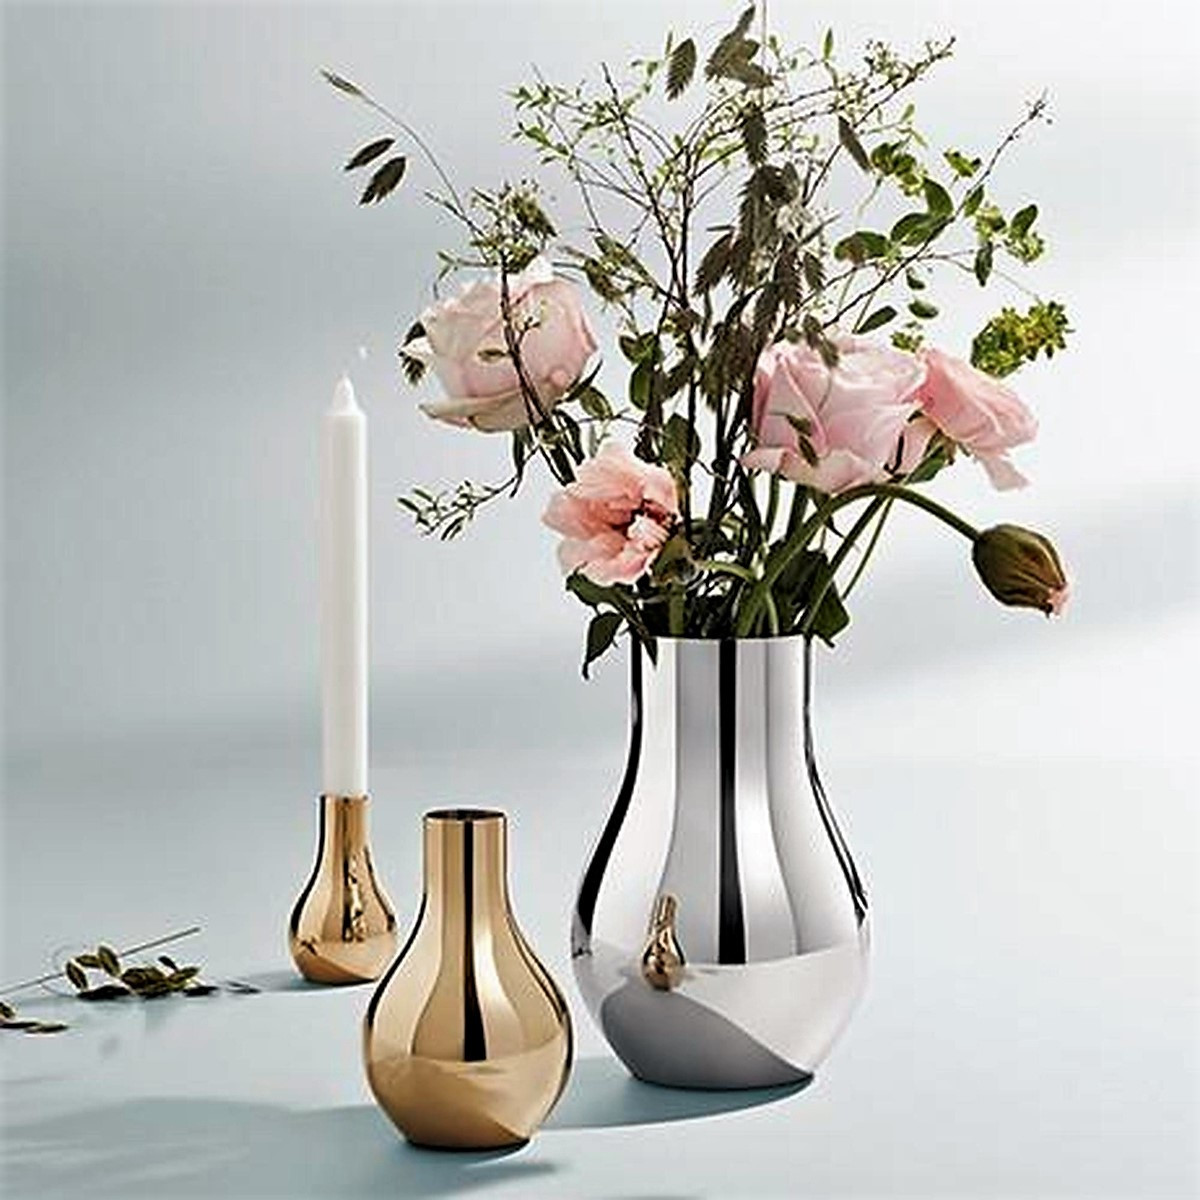 21 Lovable George Jensen Vase 2024 free download george jensen vase of georg jensen tableware vases cafu blue vase with regard to georg jensen cafu collection vase stainless steel gold plated